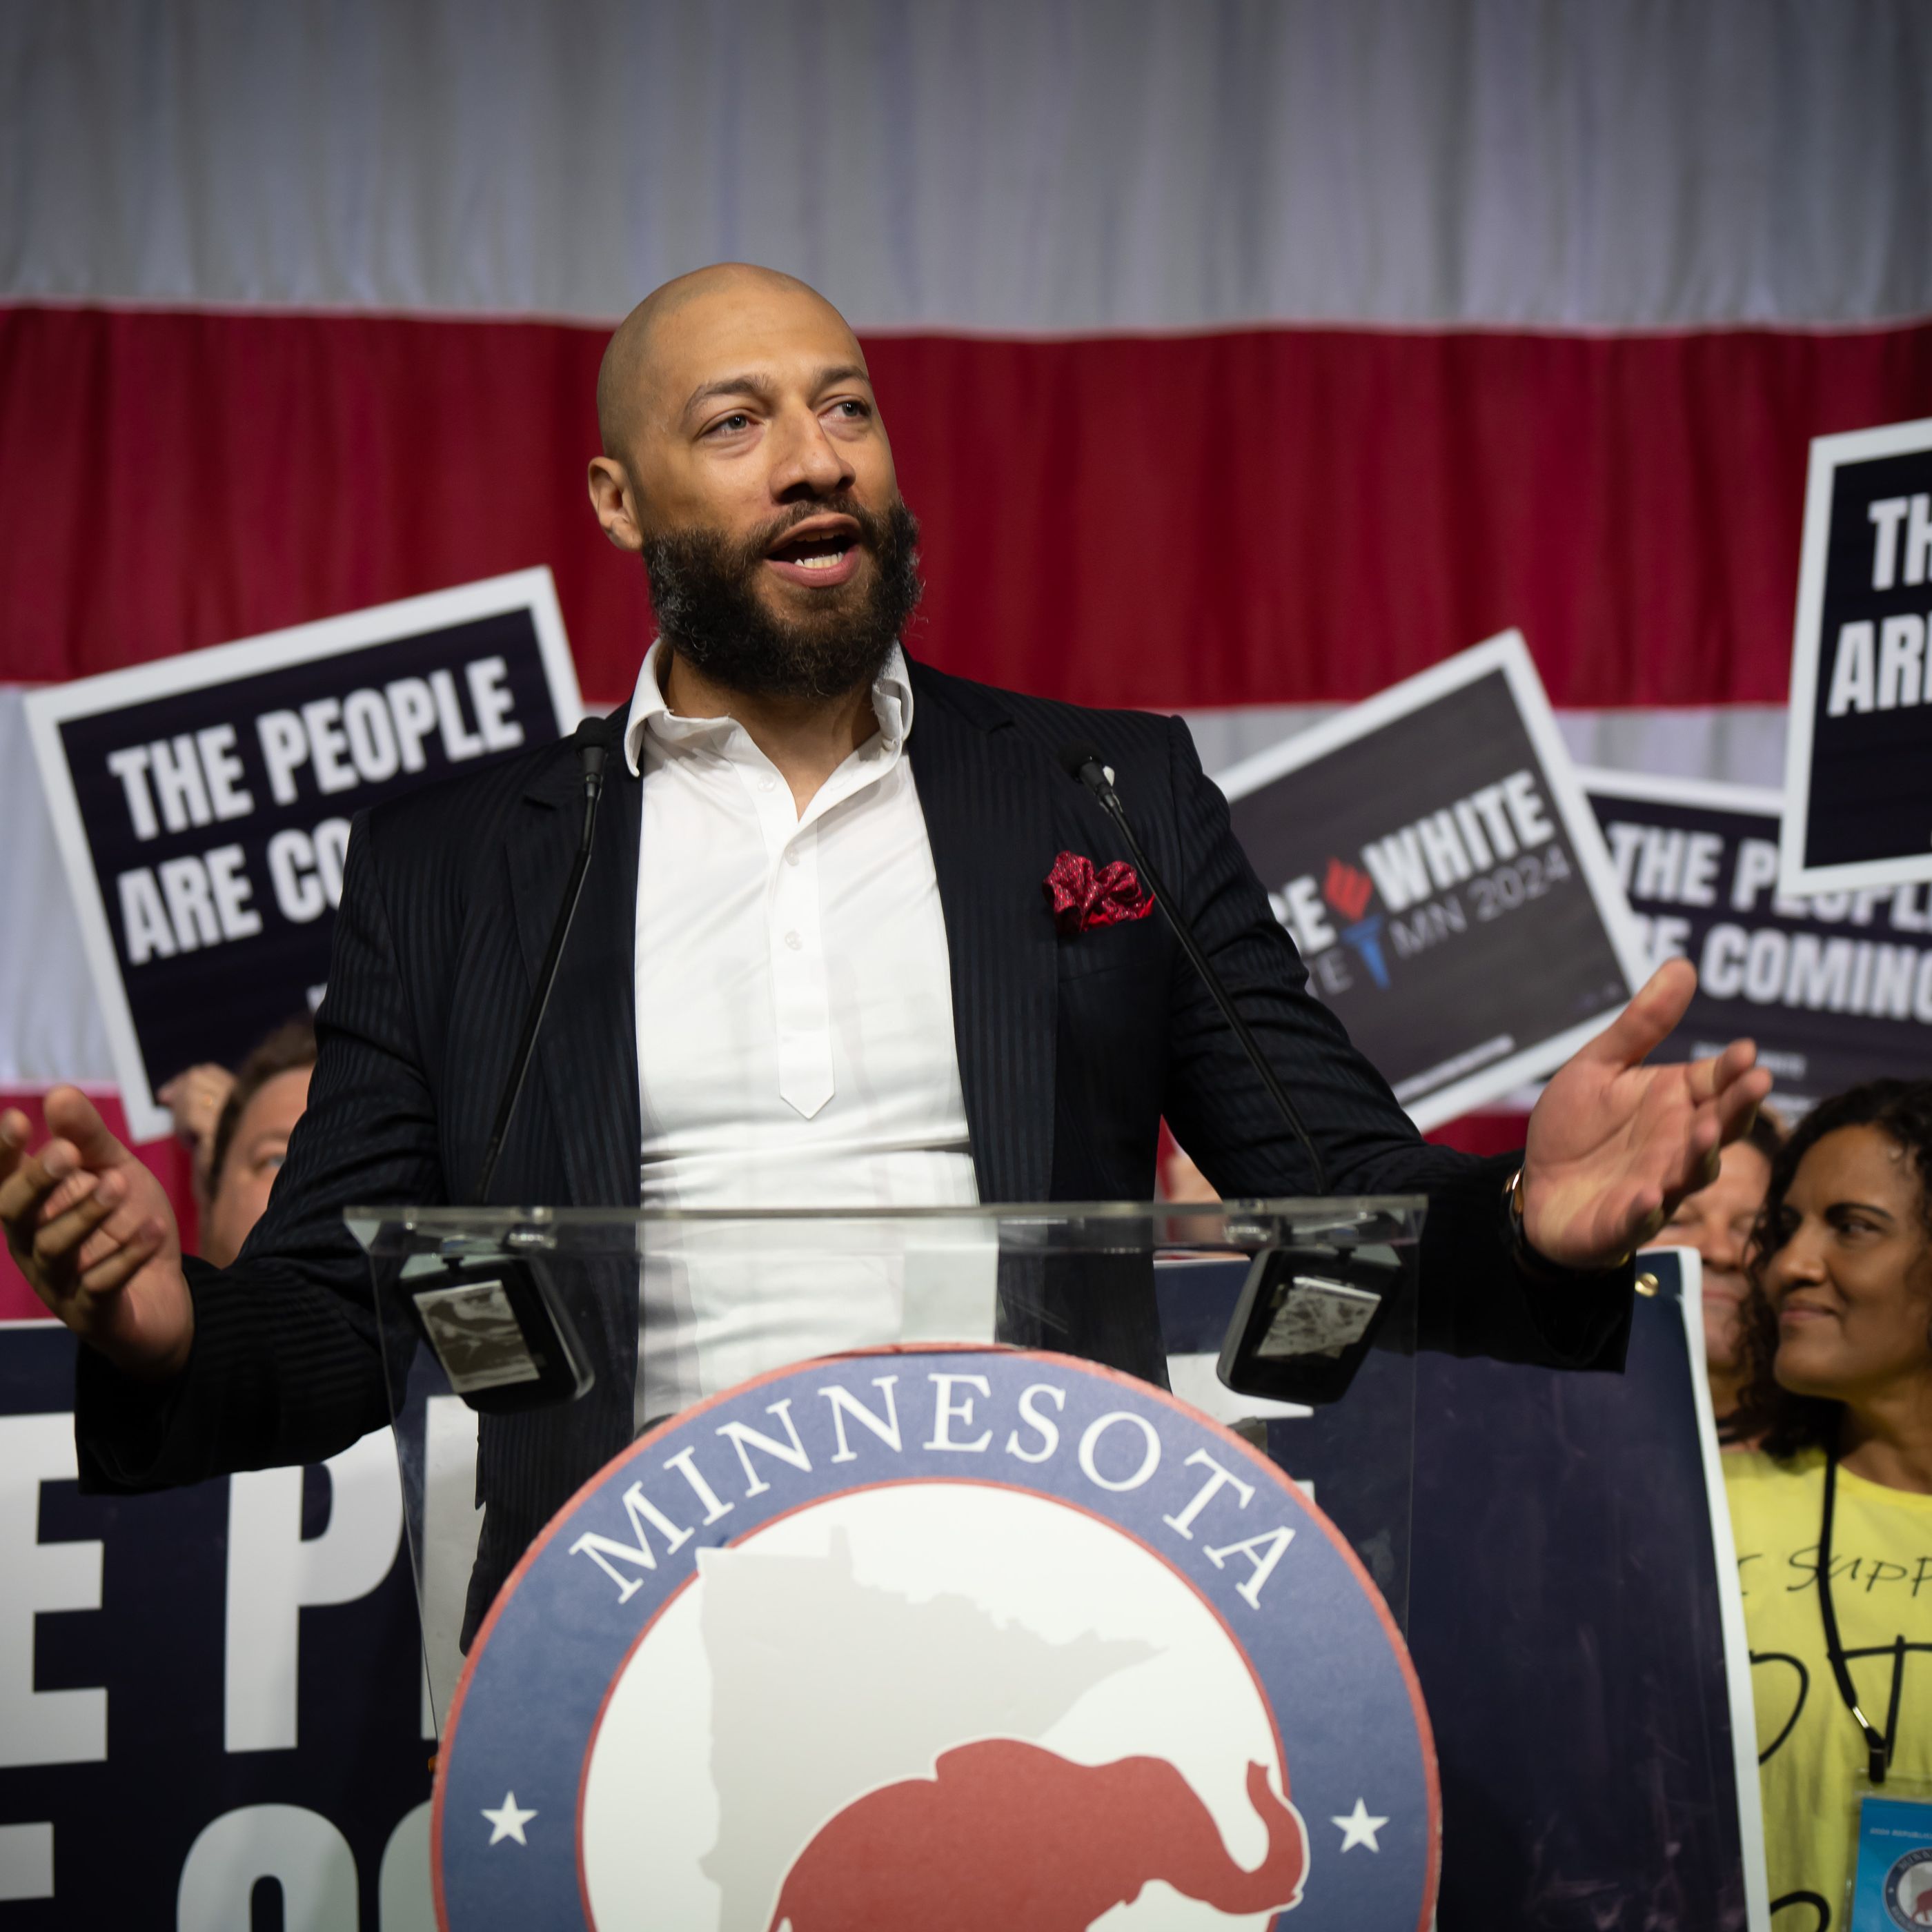 Minnesota Republican Royce White's Failed Campaign Spent $1,200 at a 